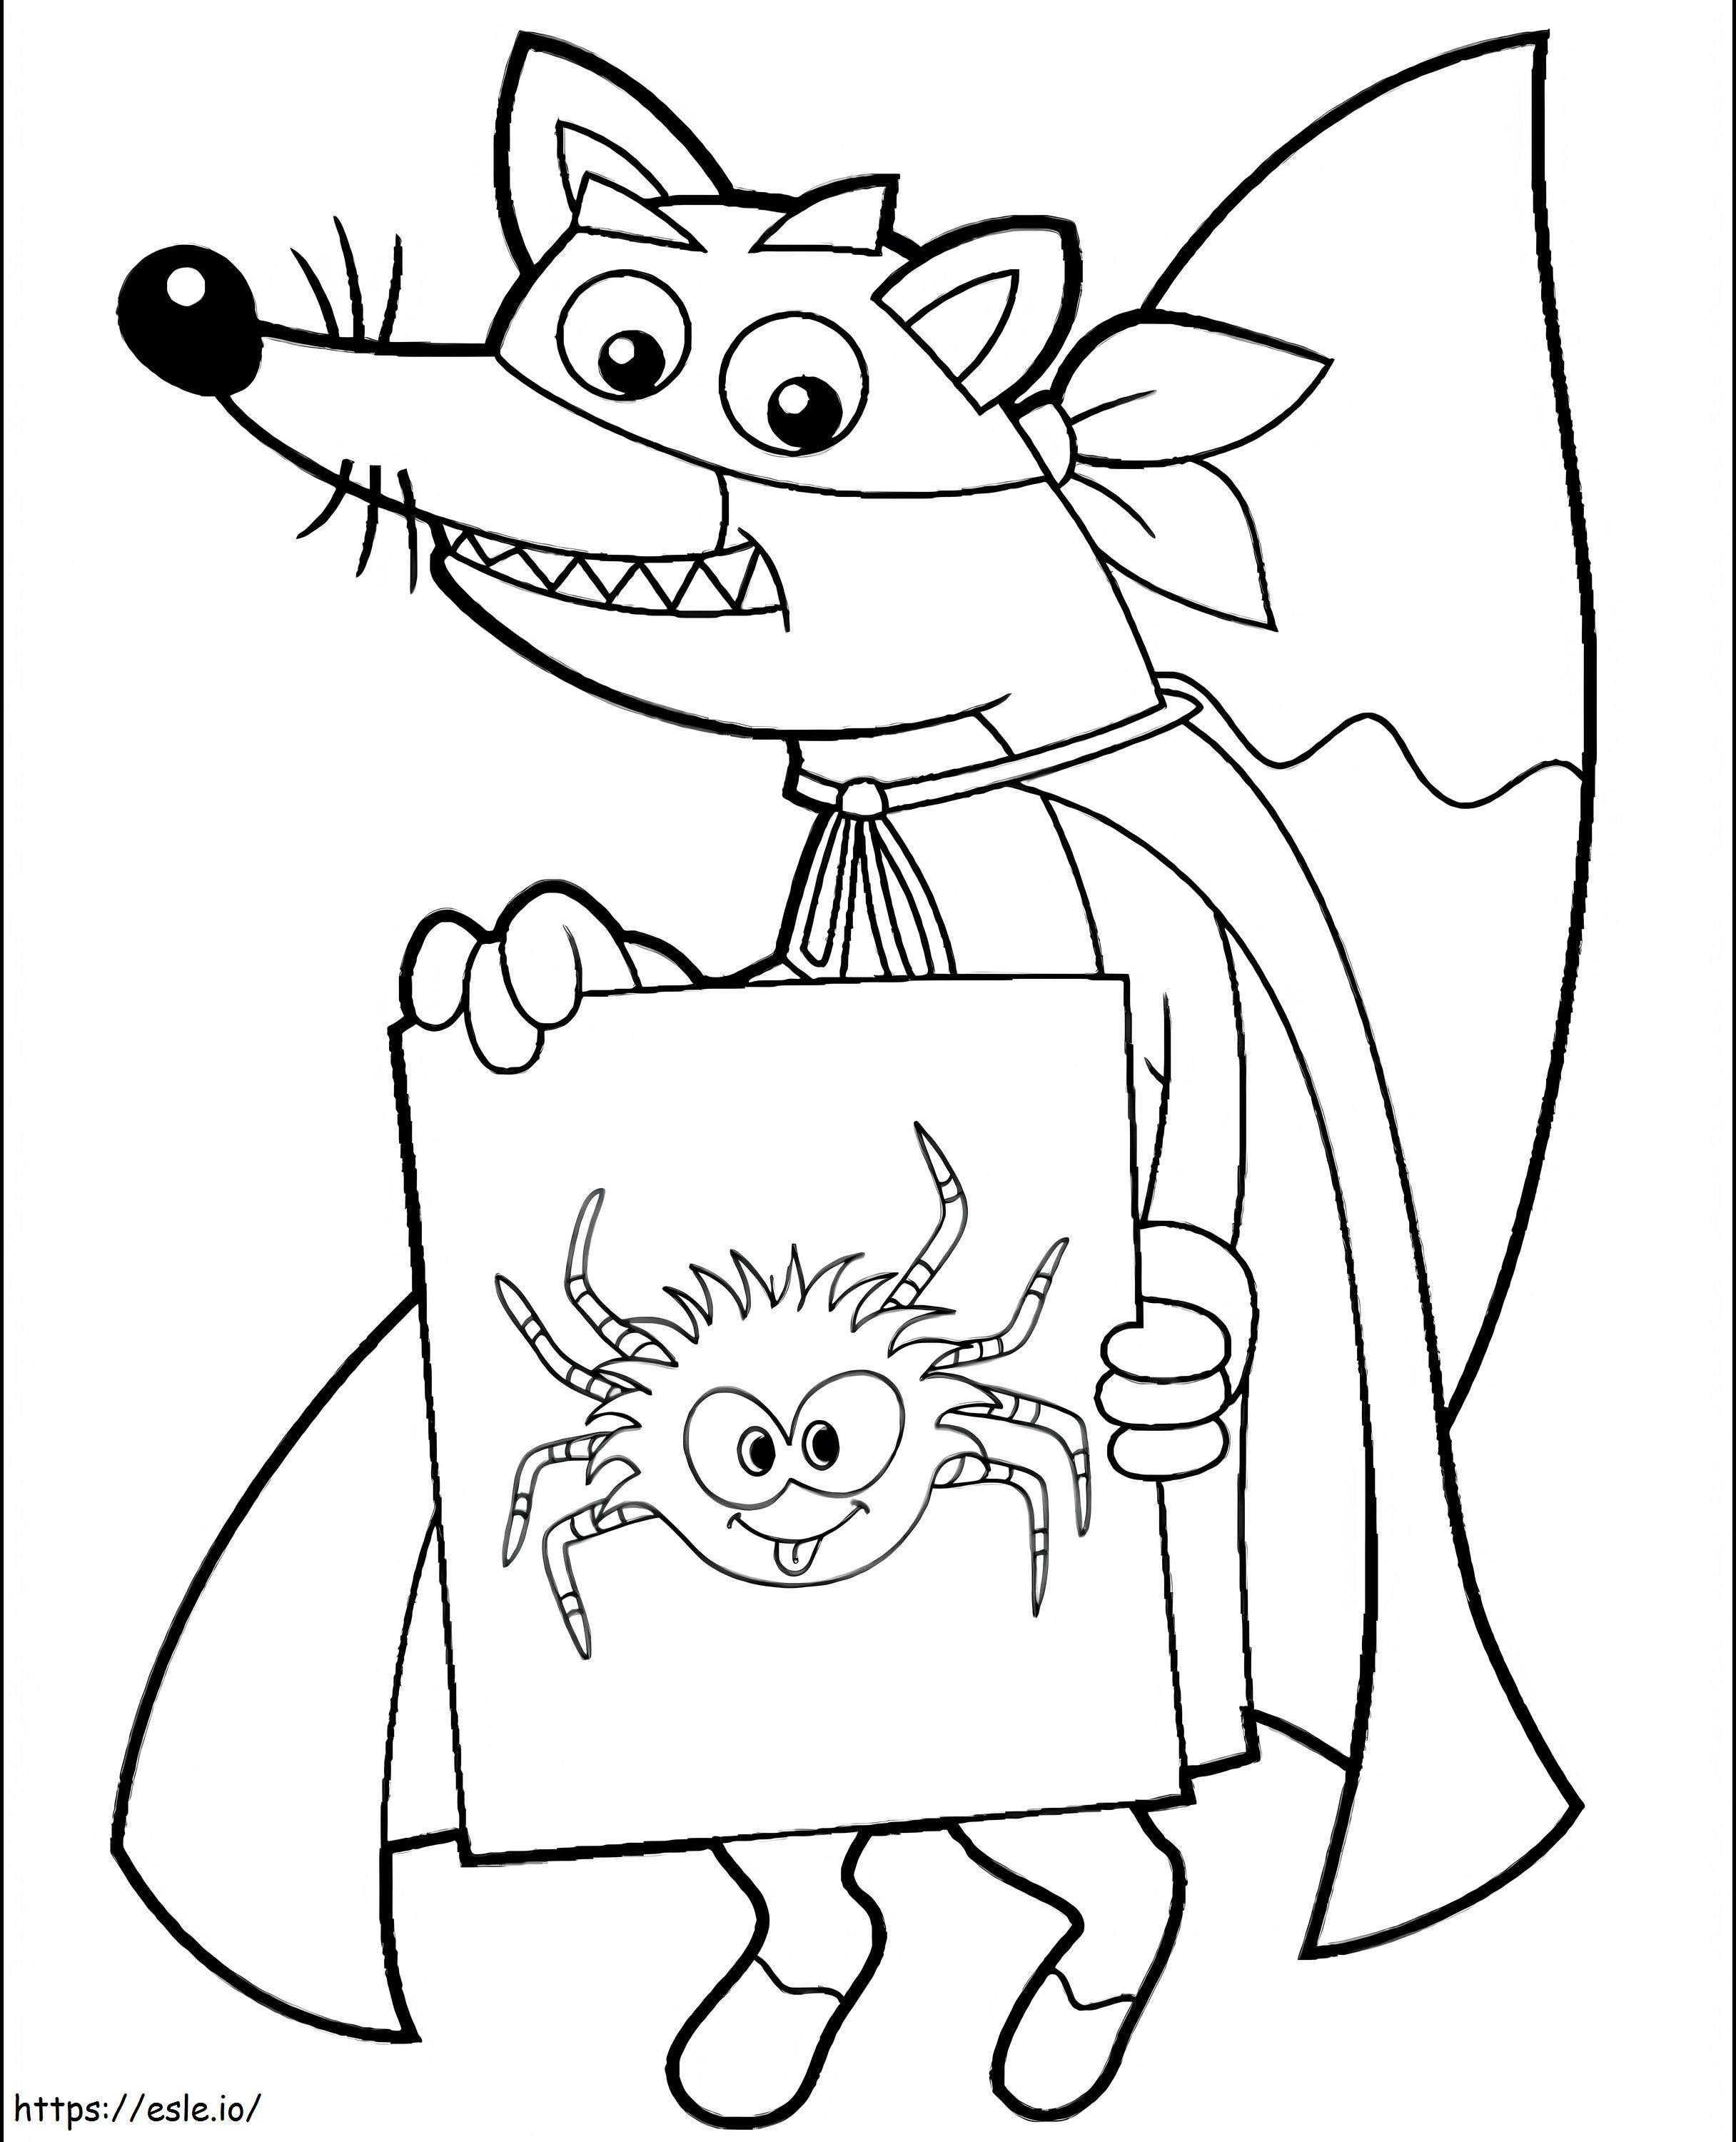 Swiper Fox Painted A Spider coloring page